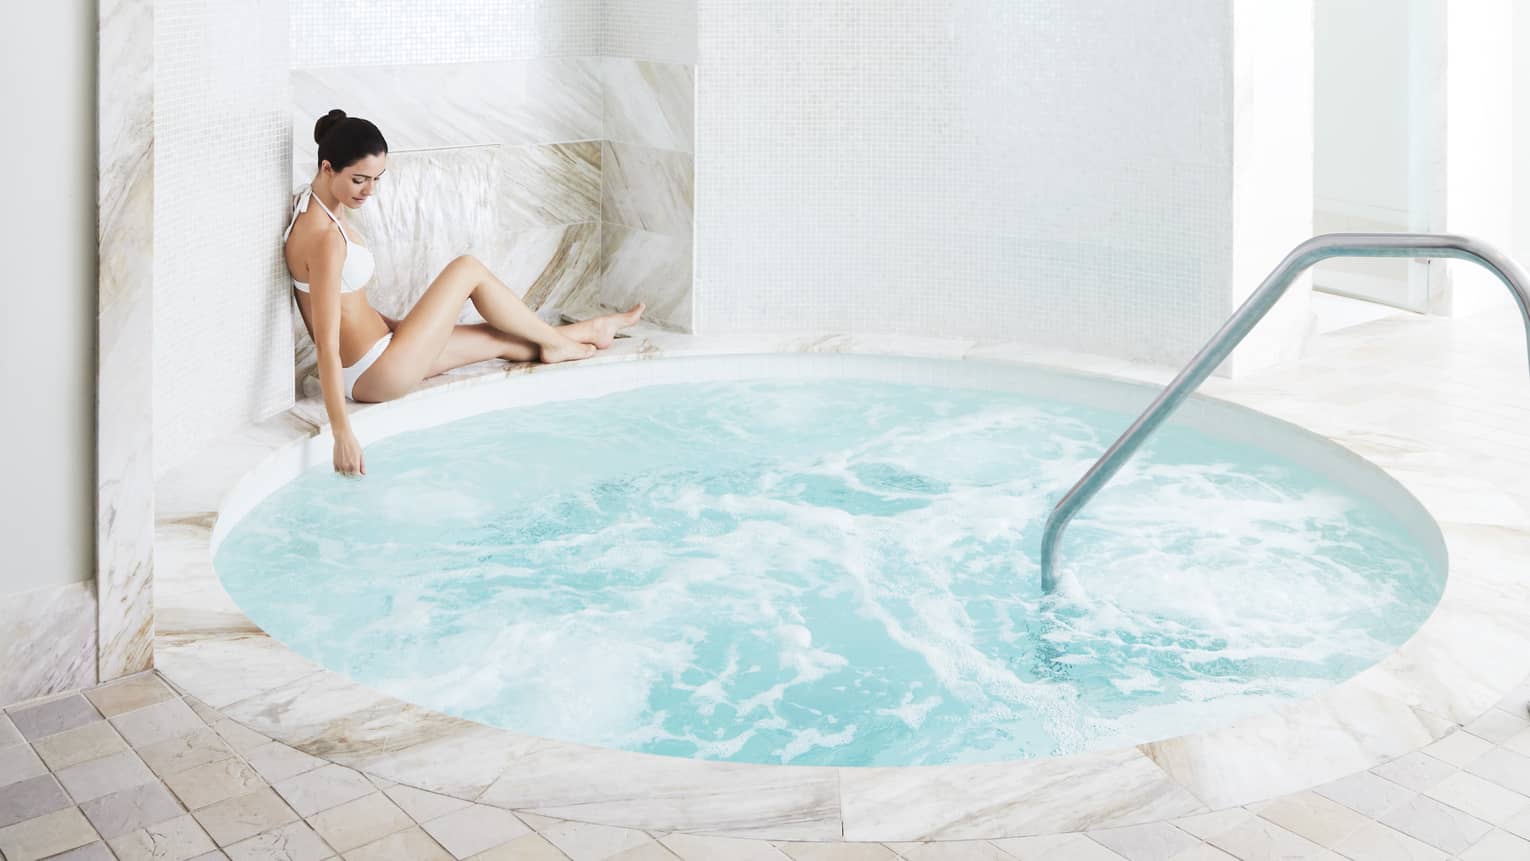 A woman relaxes by a marble hot tub in the spa